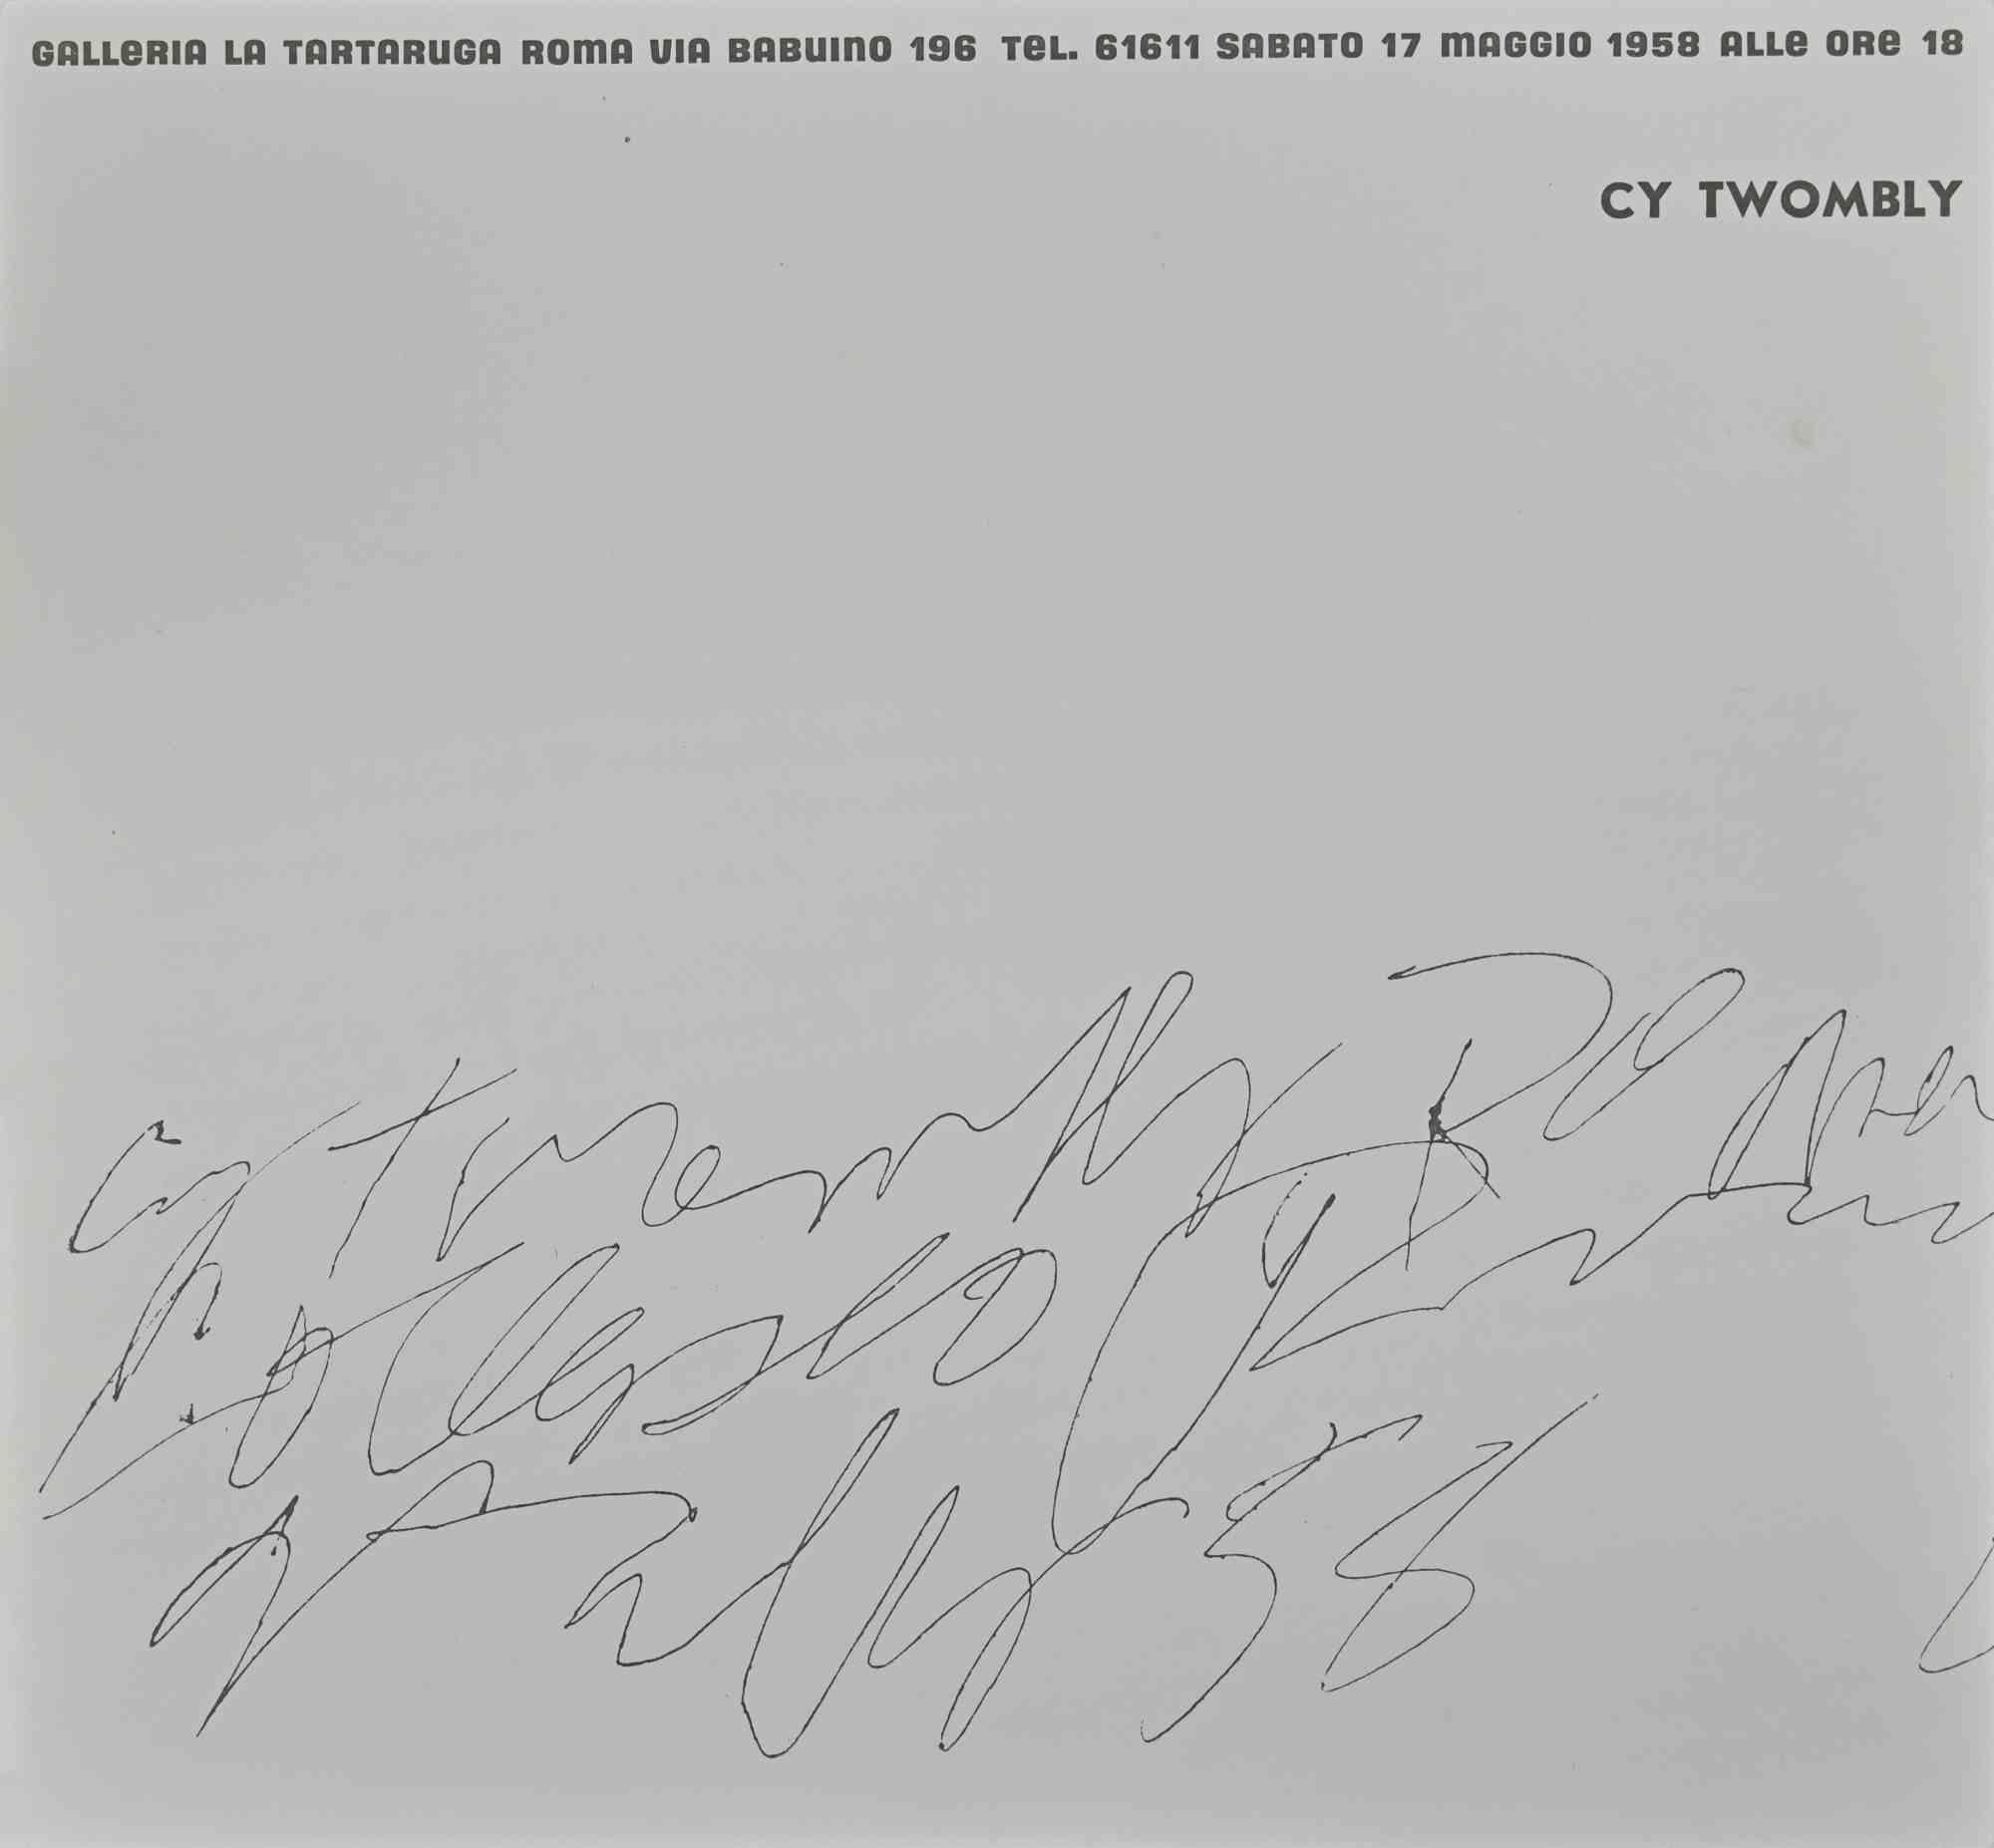 Zy Twombly Exhibition Leaflet - Galleria La Tartaruga 1958 – Art von Cy Twombly